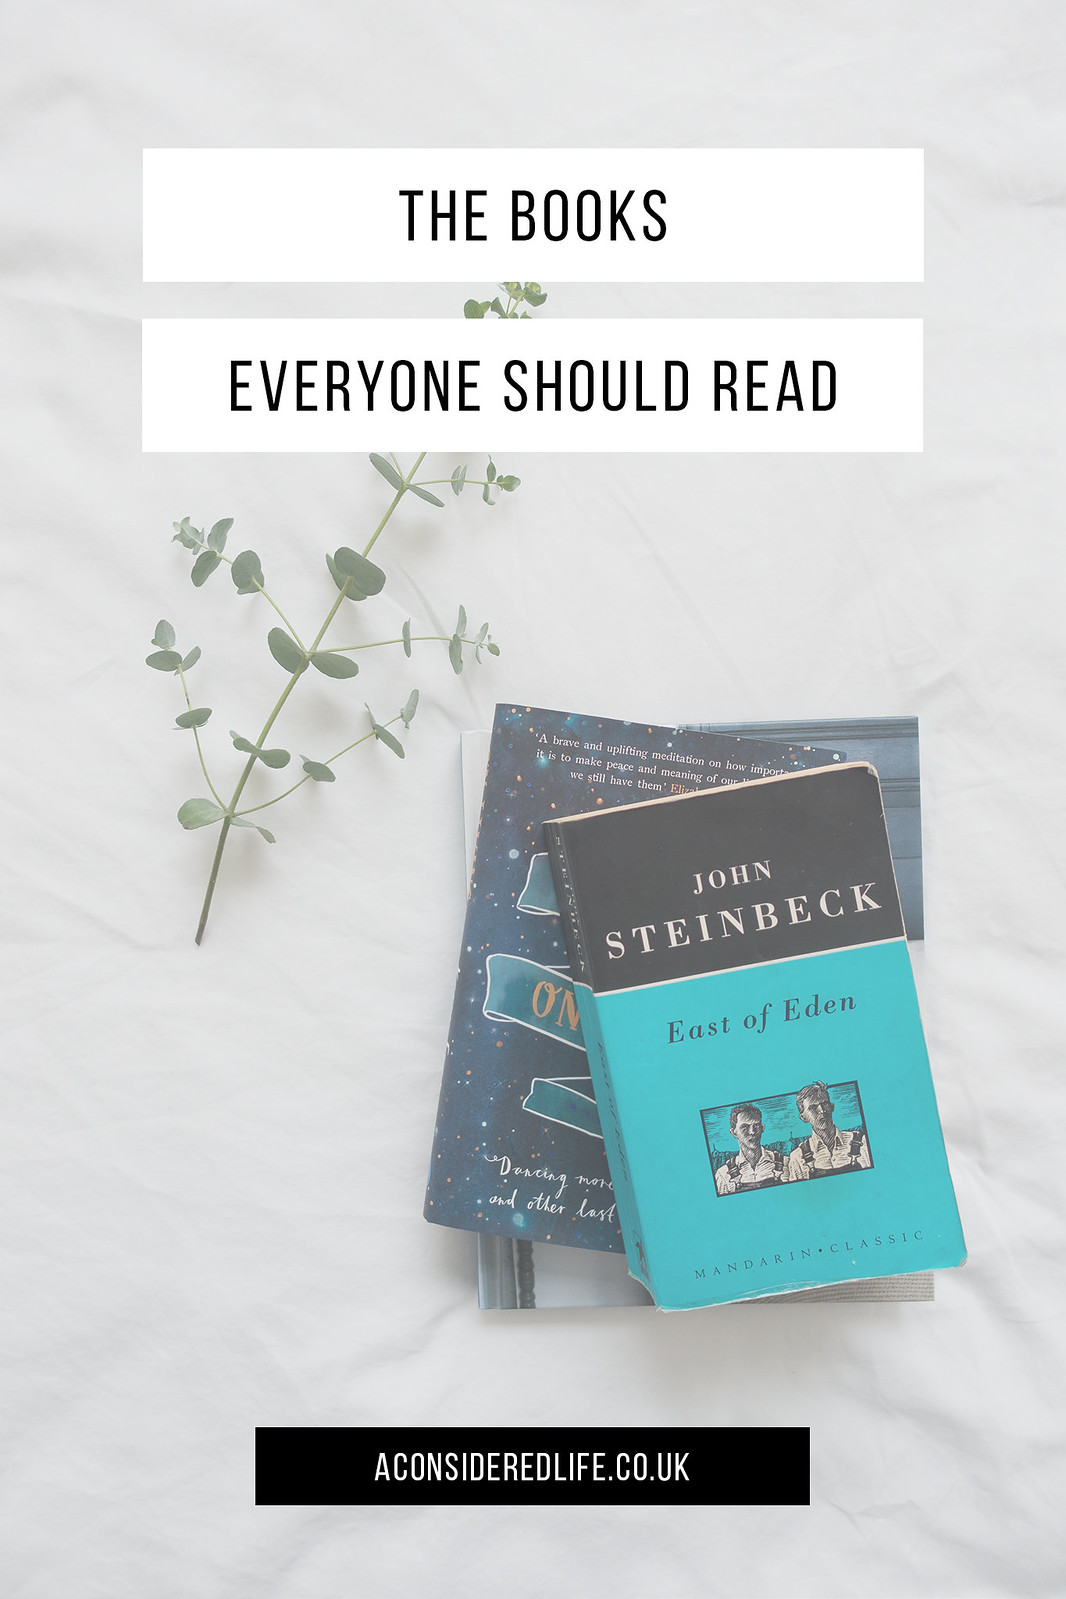 what are books that everyone should read